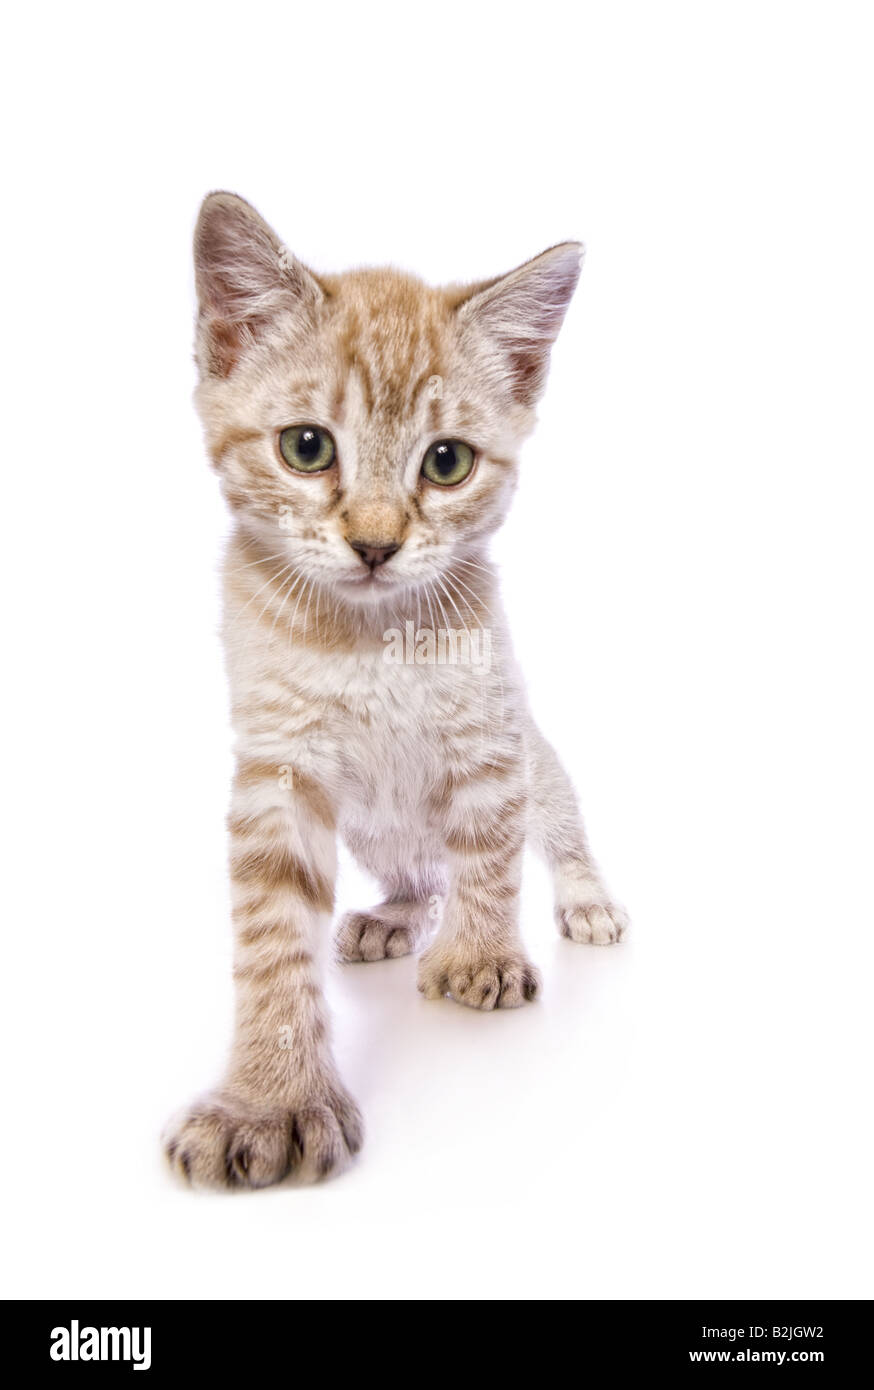 Cute kitten with big feet walking towards the camera isolated on white background Stock Photo